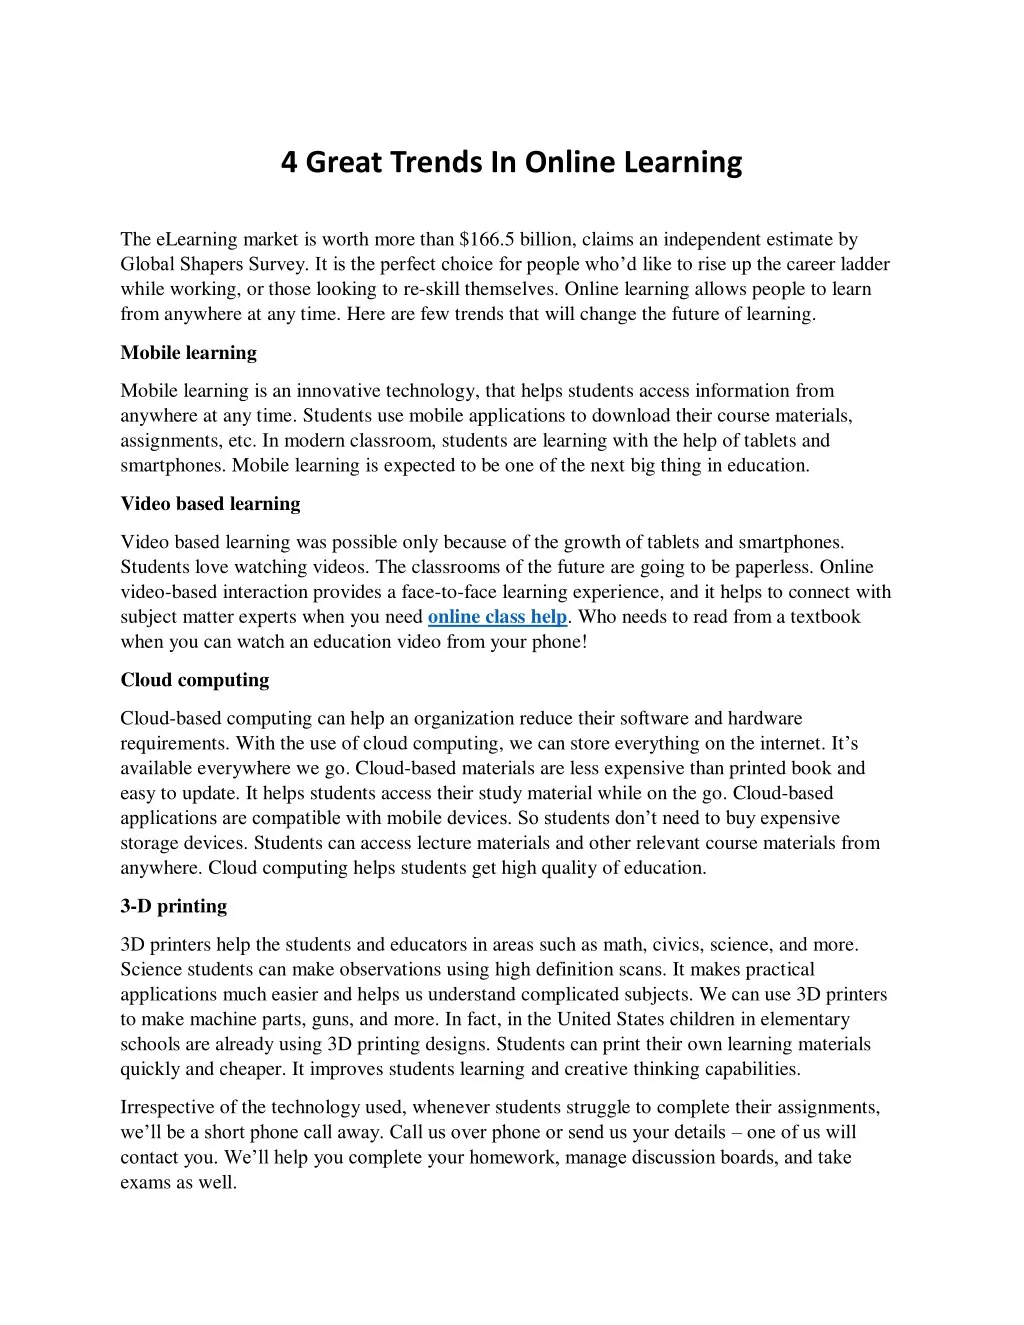 4 great trends in online learning